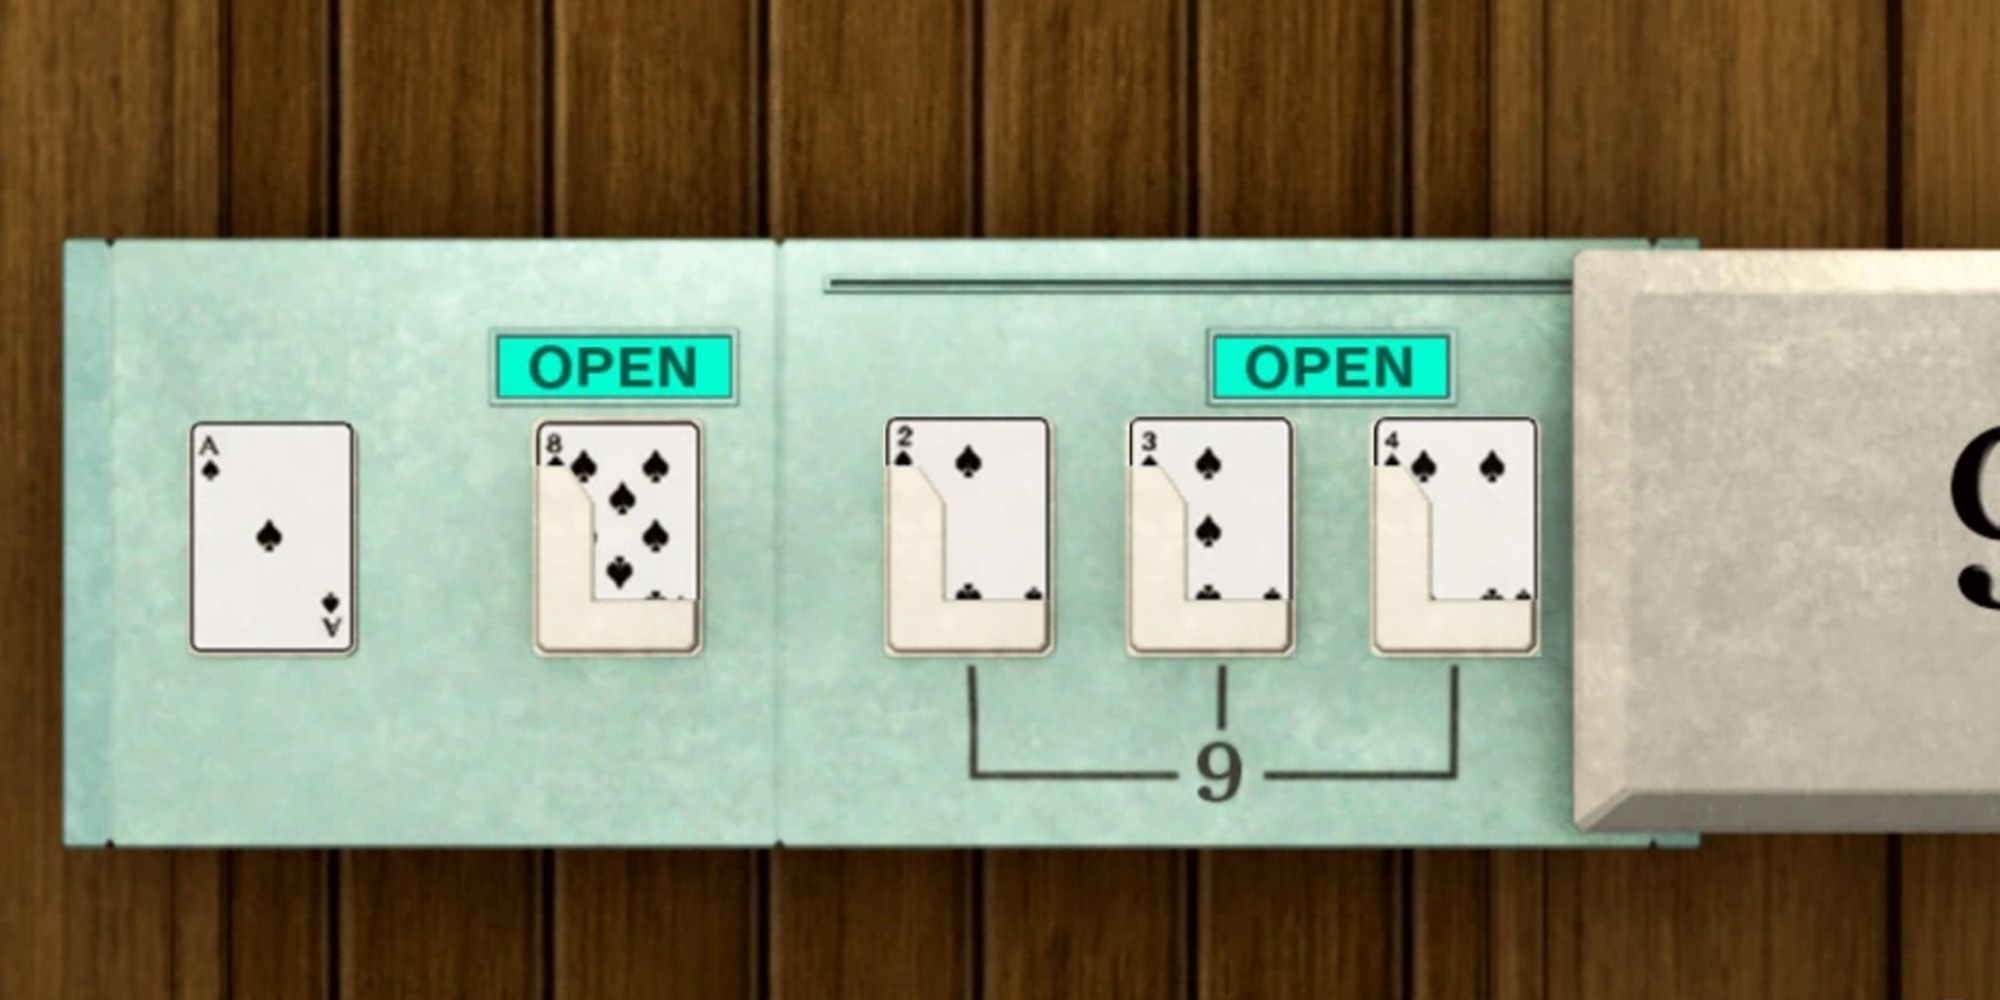 The Final Puzzle of the Casino Room. Entering The Final Three Cards Allows You To Escape The Room and Progress Forward